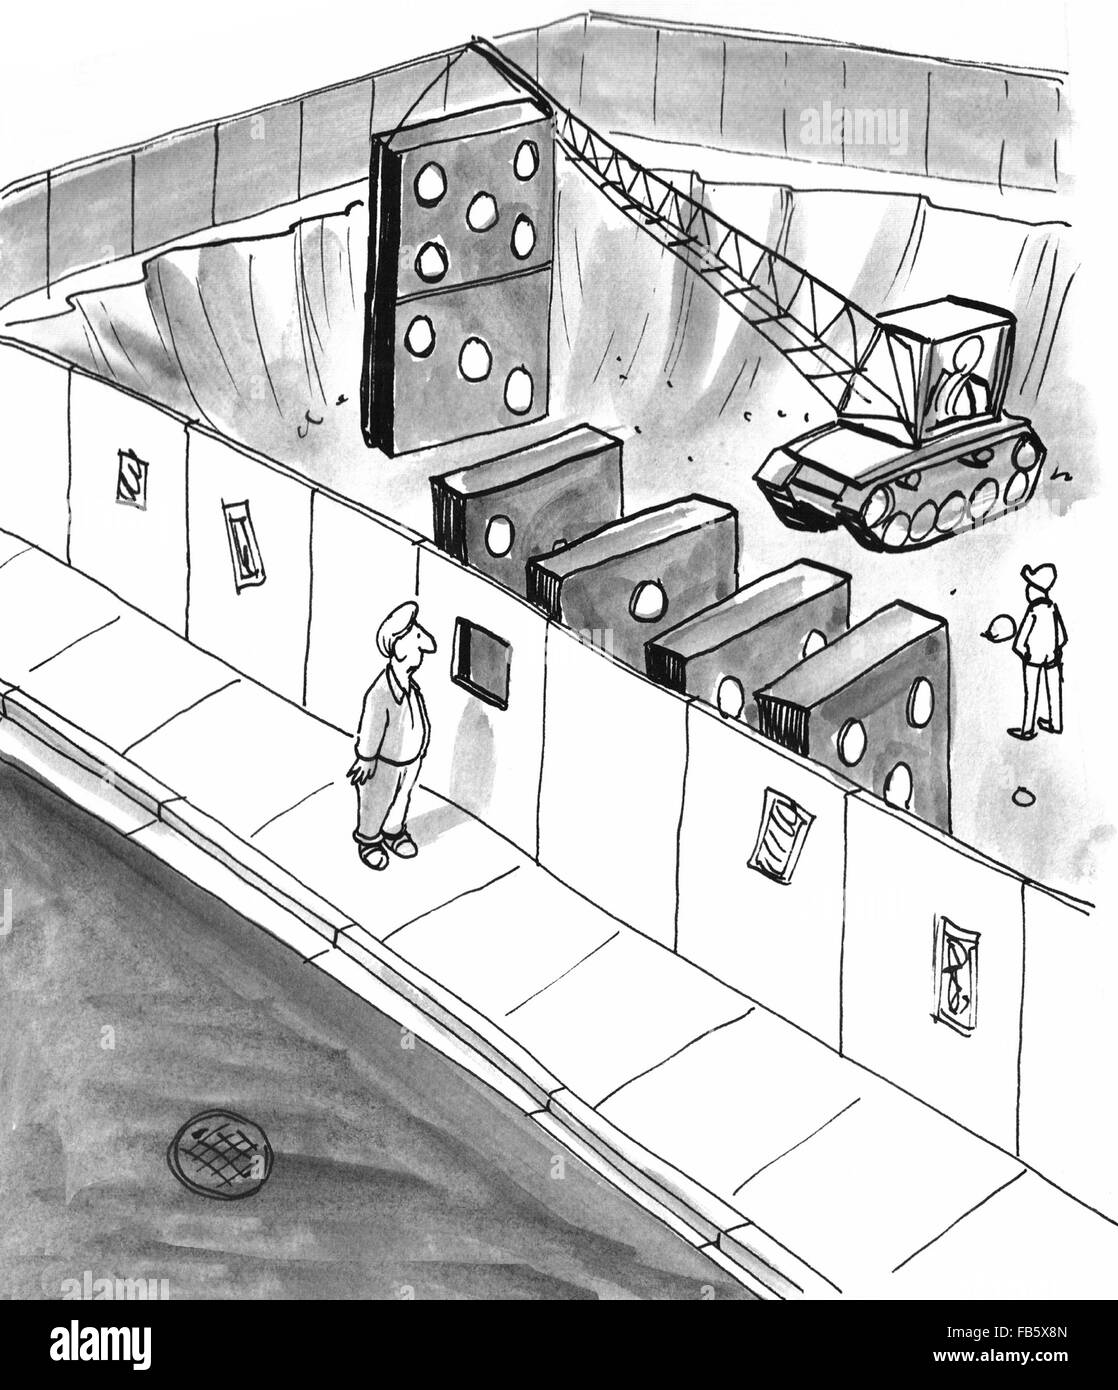 Building construction cartoon.  The building was being constructed with domino game pieces rather than steel girders. Stock Photo